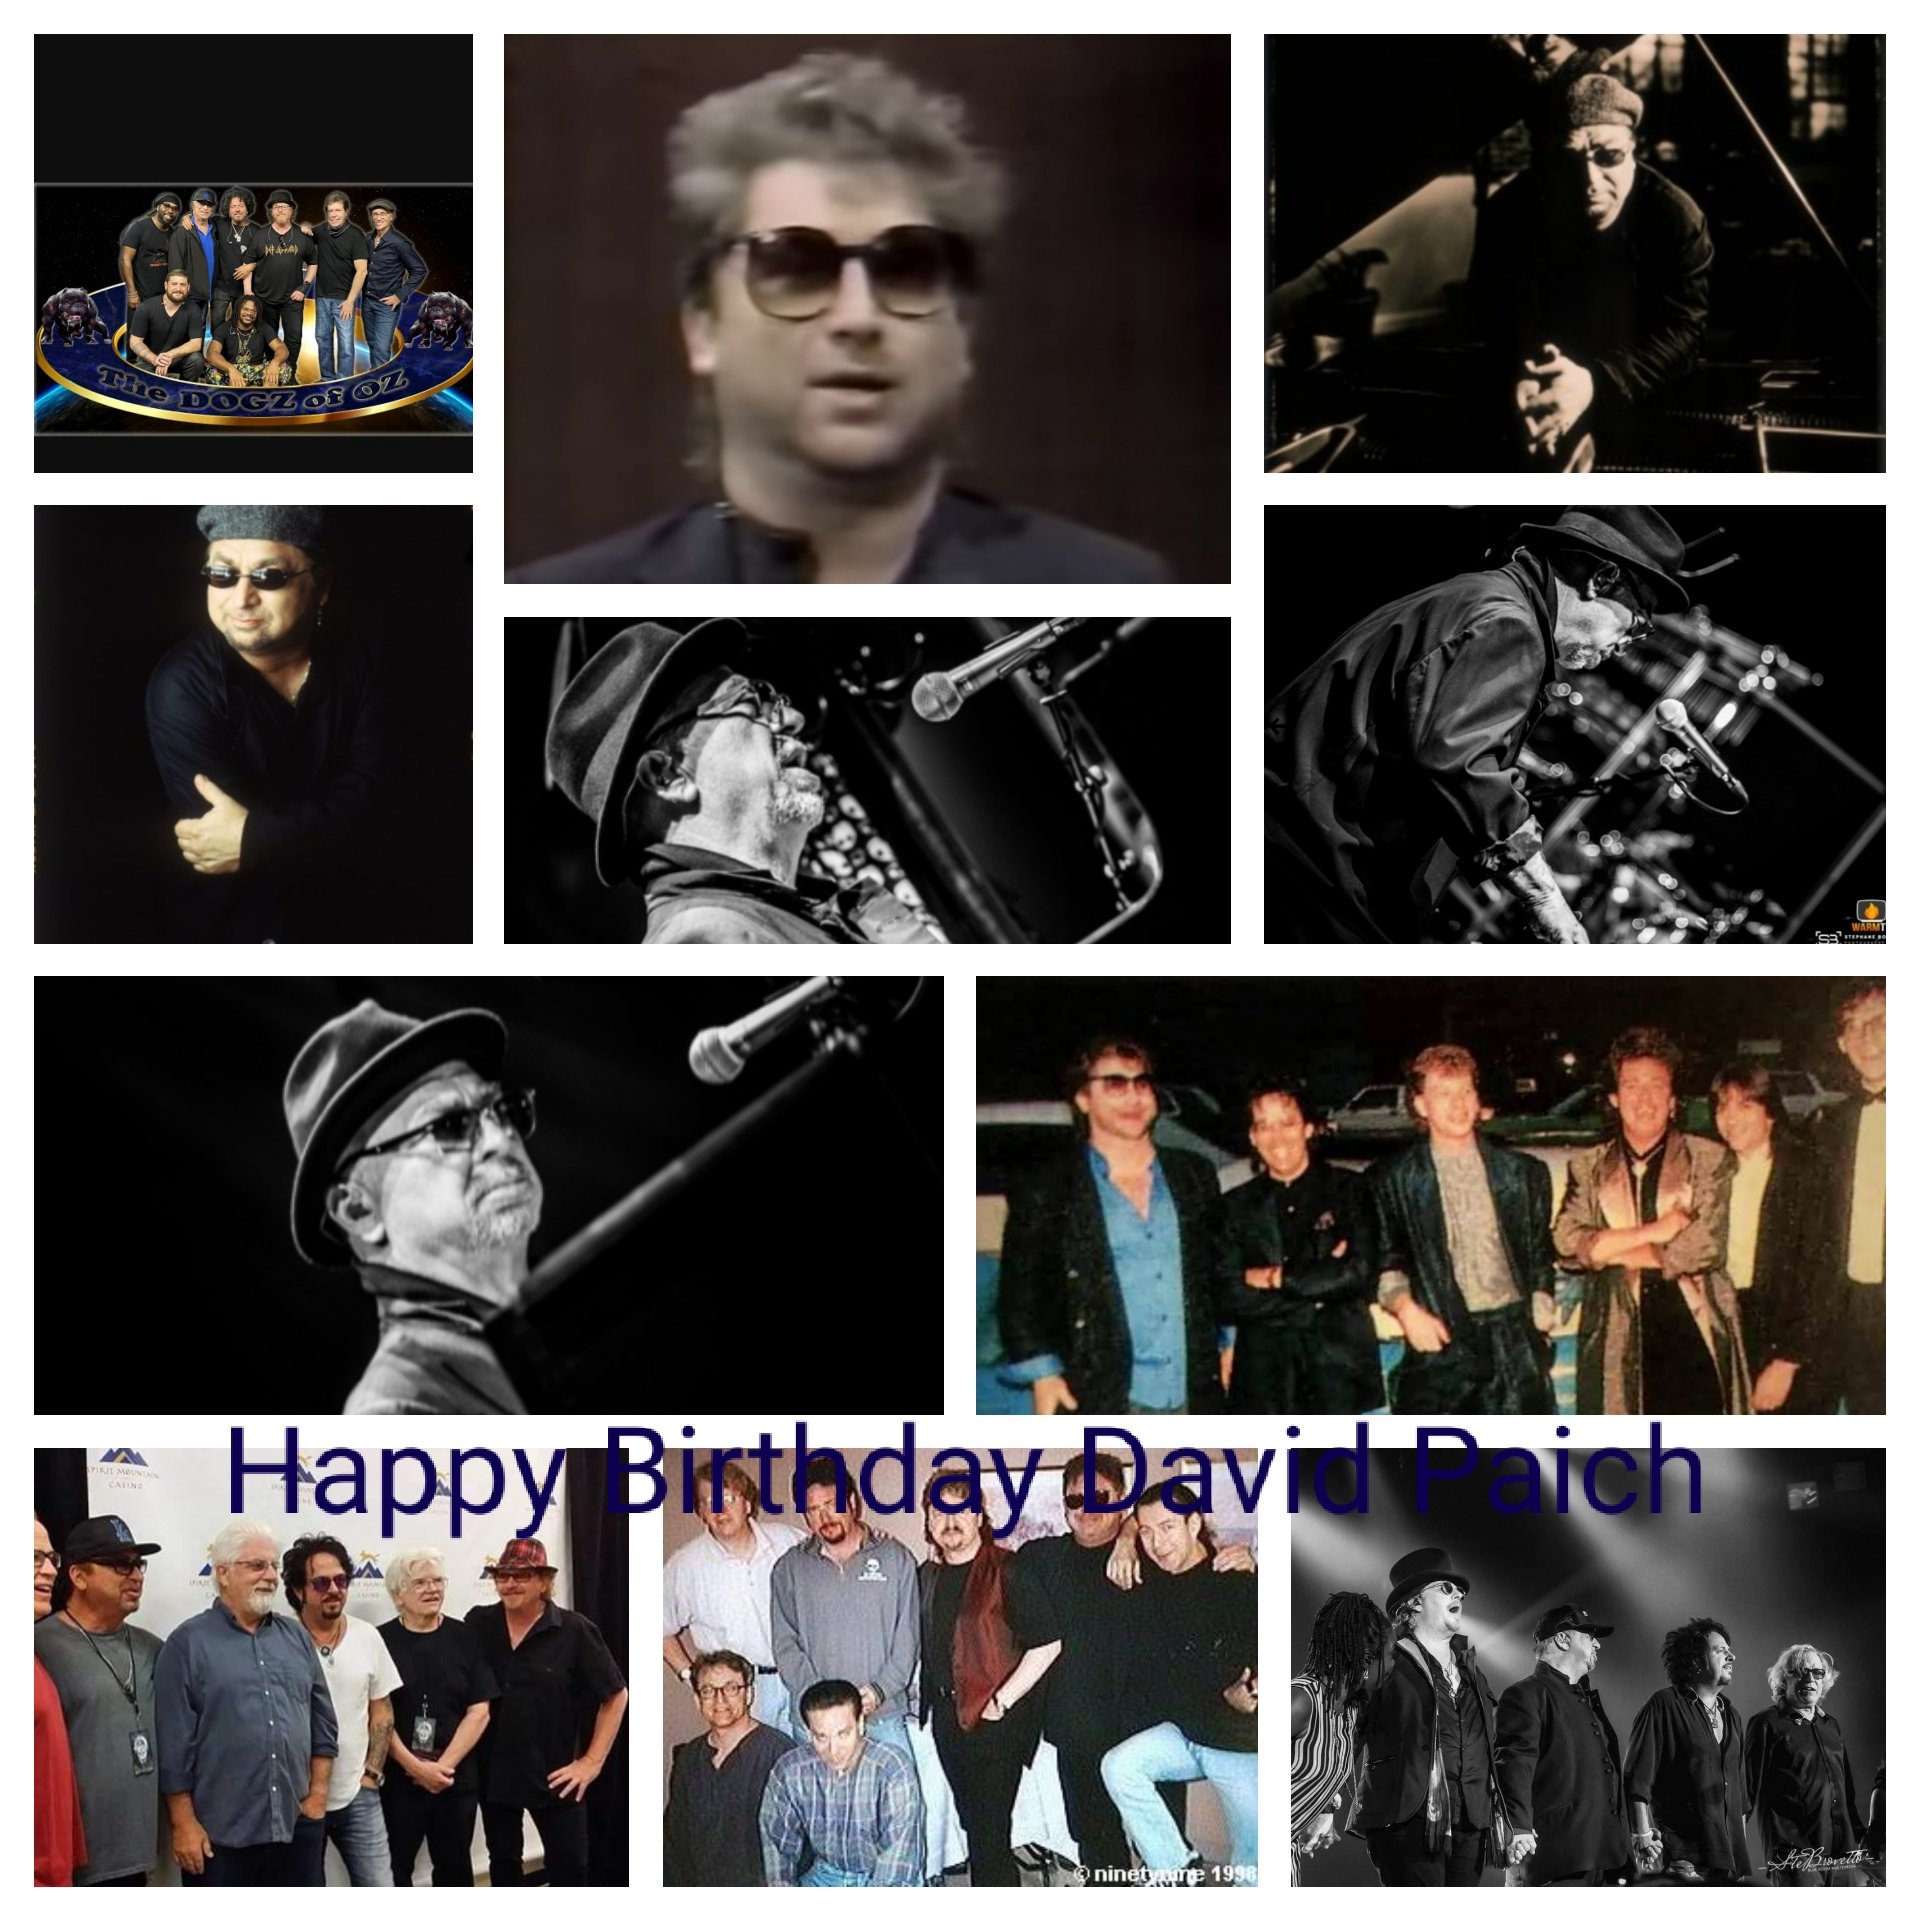 Since it already his birthday in some parts of the world. Happy Birthday David Paich!! 6-25 